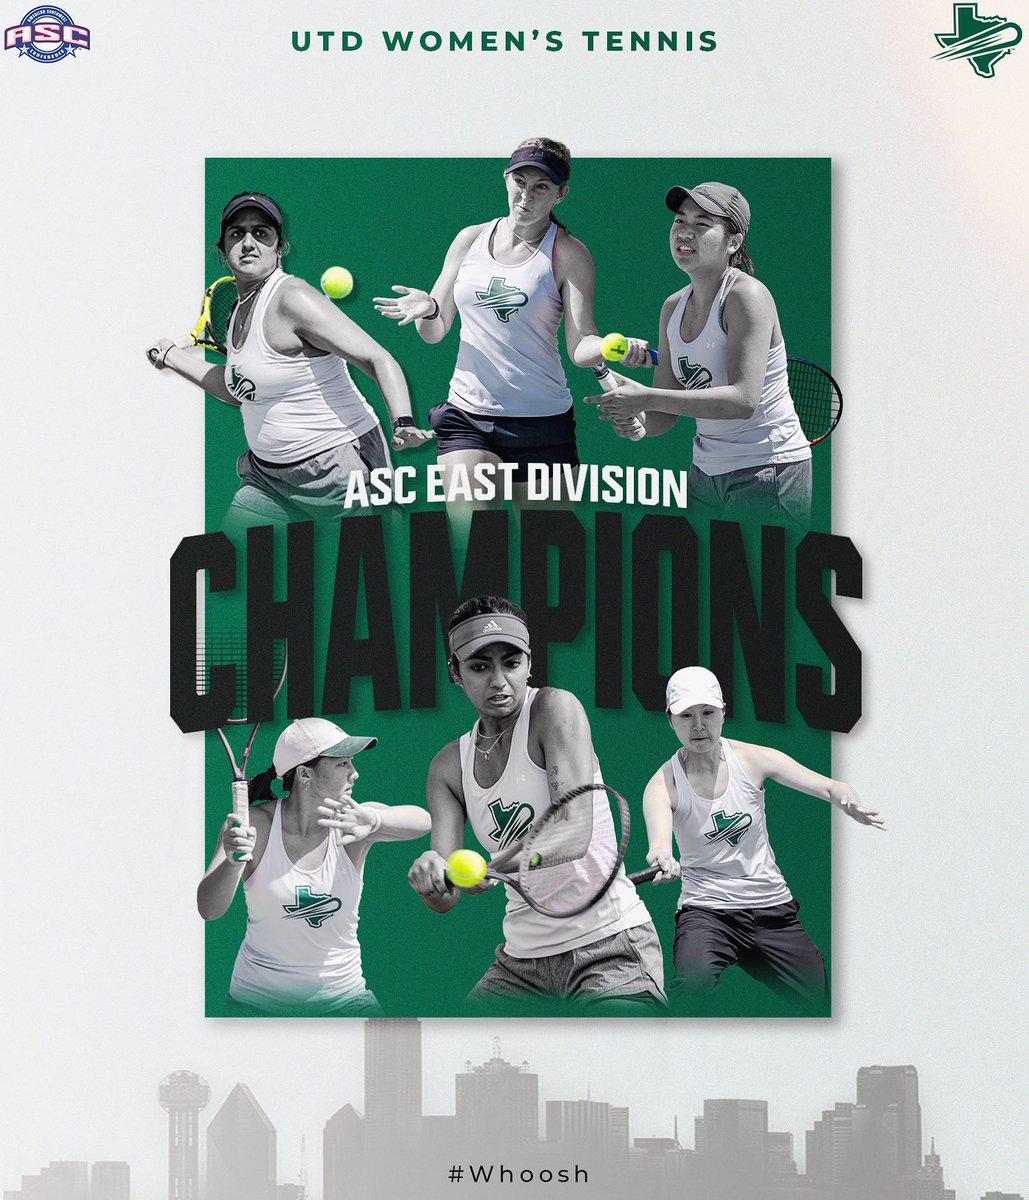 Win the East ✅ Host the conference tournament ✅ We will see you this Friday at 2 for our first round of playoffs right here in Richardson! #Whoosh #Champions